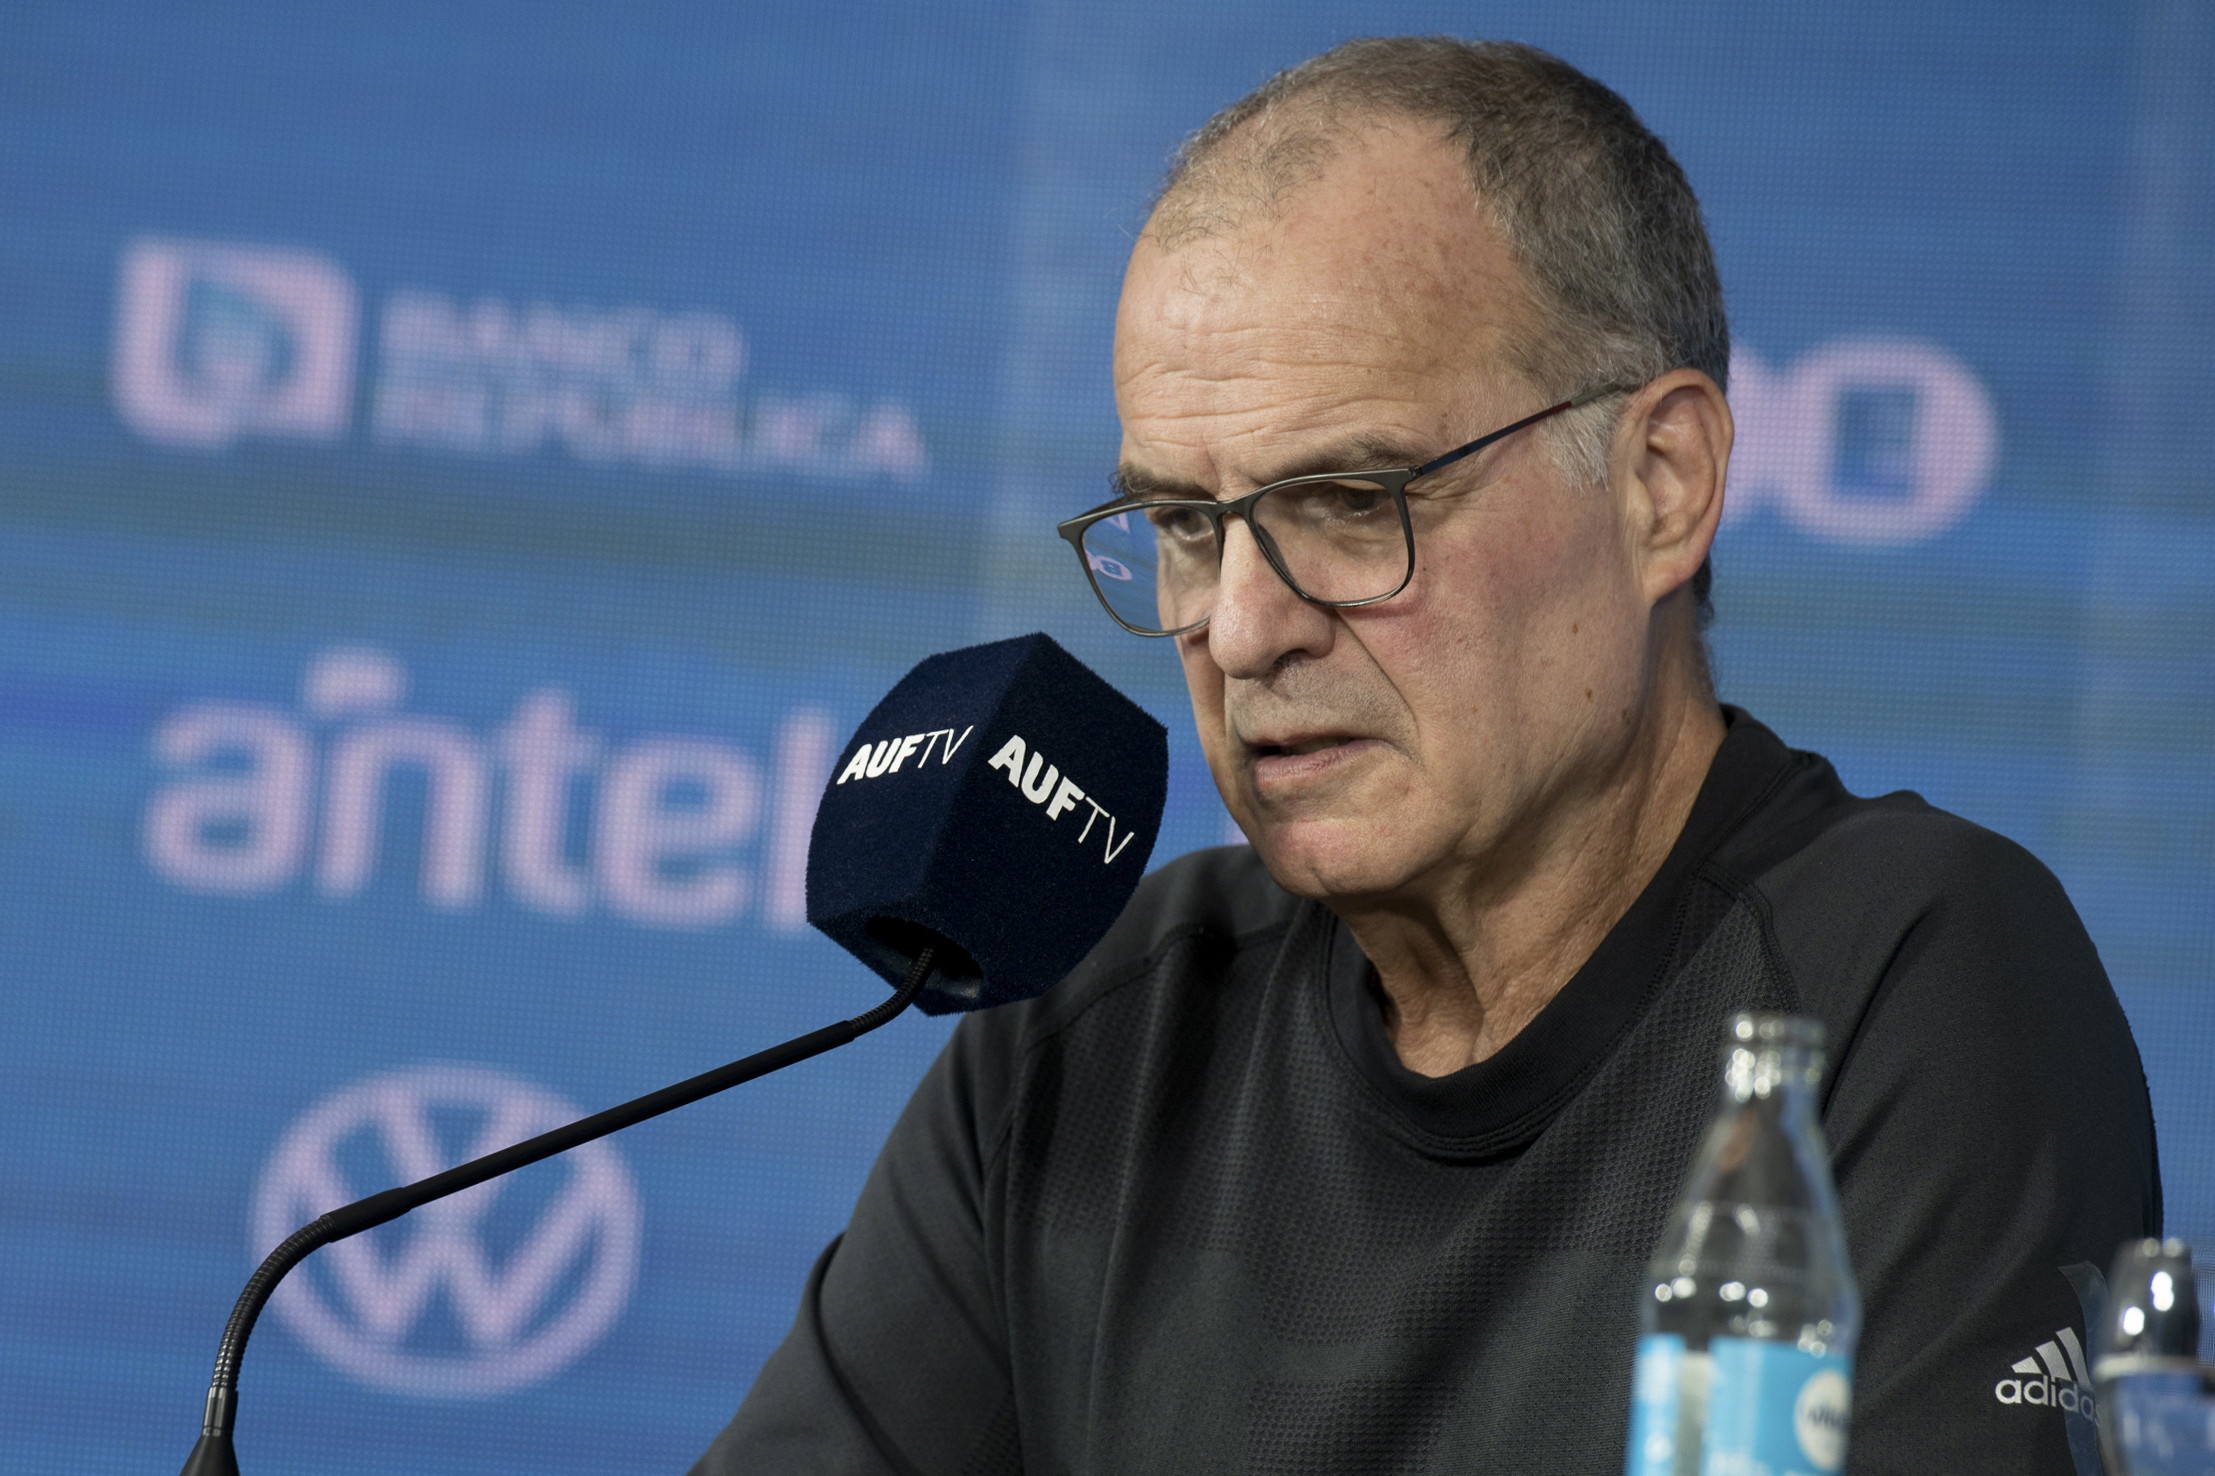 new-bielsa-madness:-amateur-player-called-up-to-the-uruguay-national-team-prior-to-the-copa-america